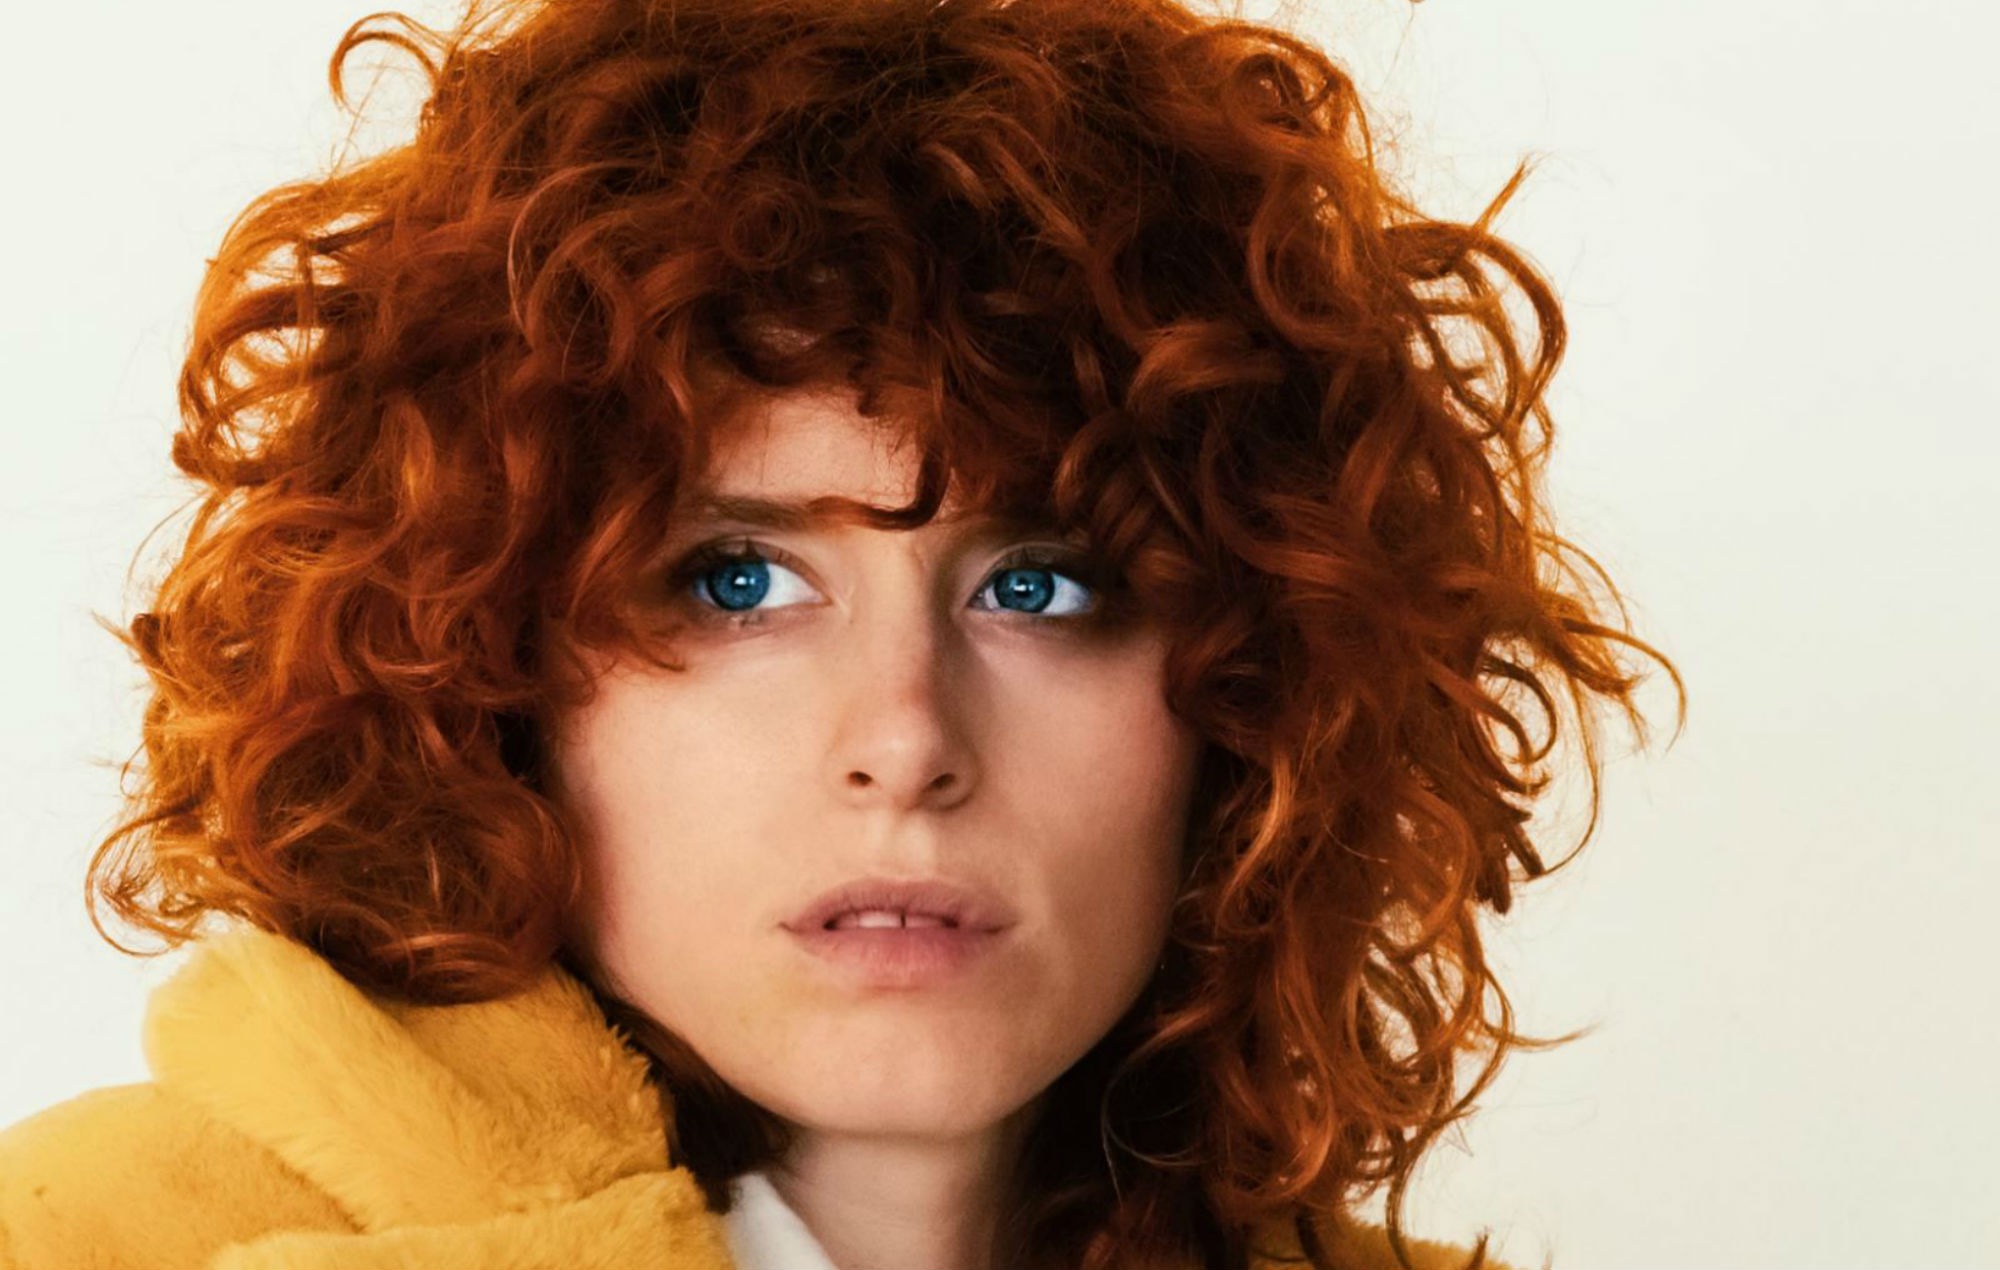 Kiesza on the car crash that nearly killed her: “I thought I might never come back to music”